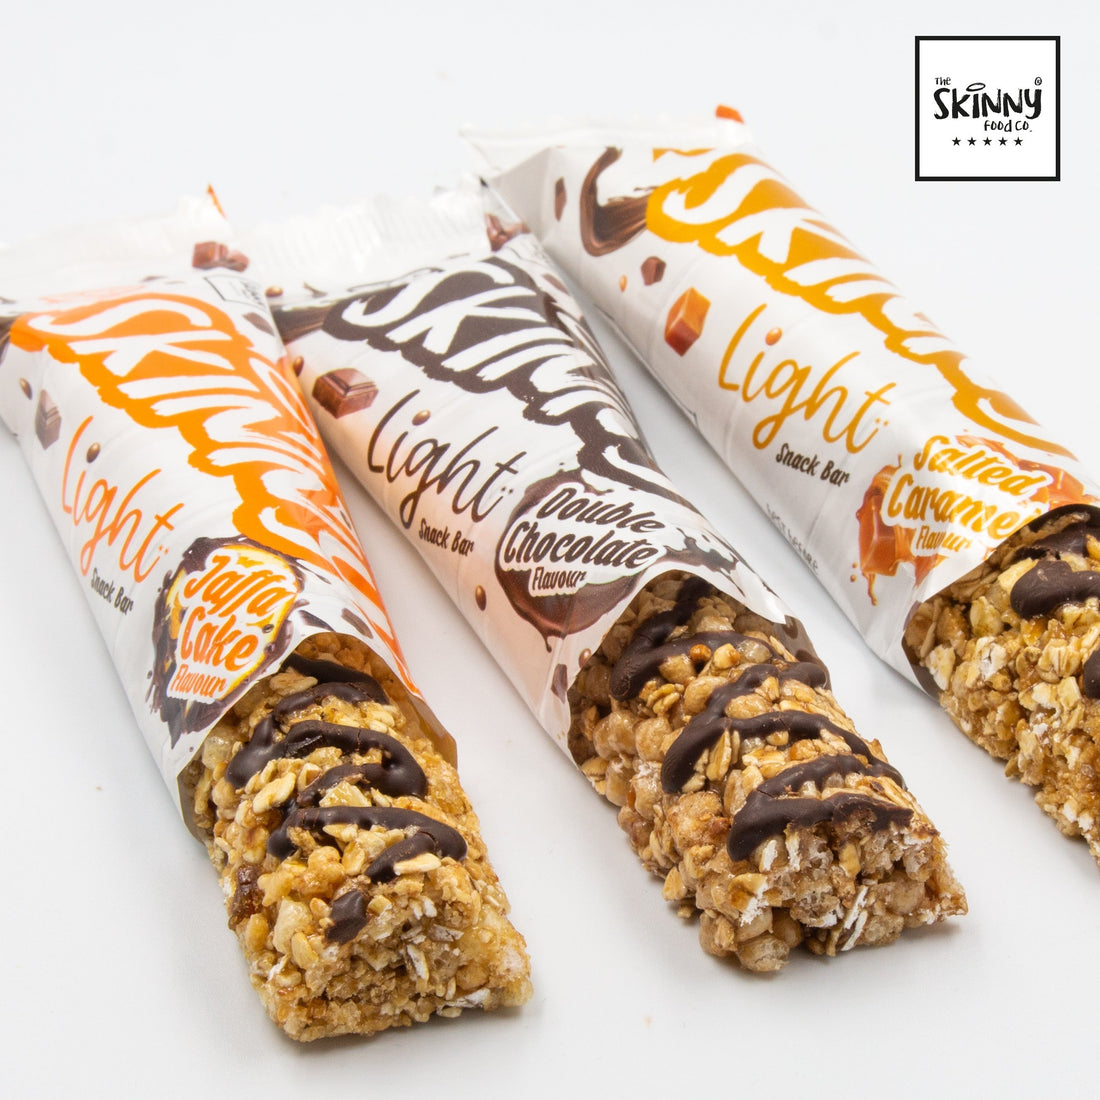 Introducing our NEW Skinny Light Snack Bars! - theskinnyfoodco